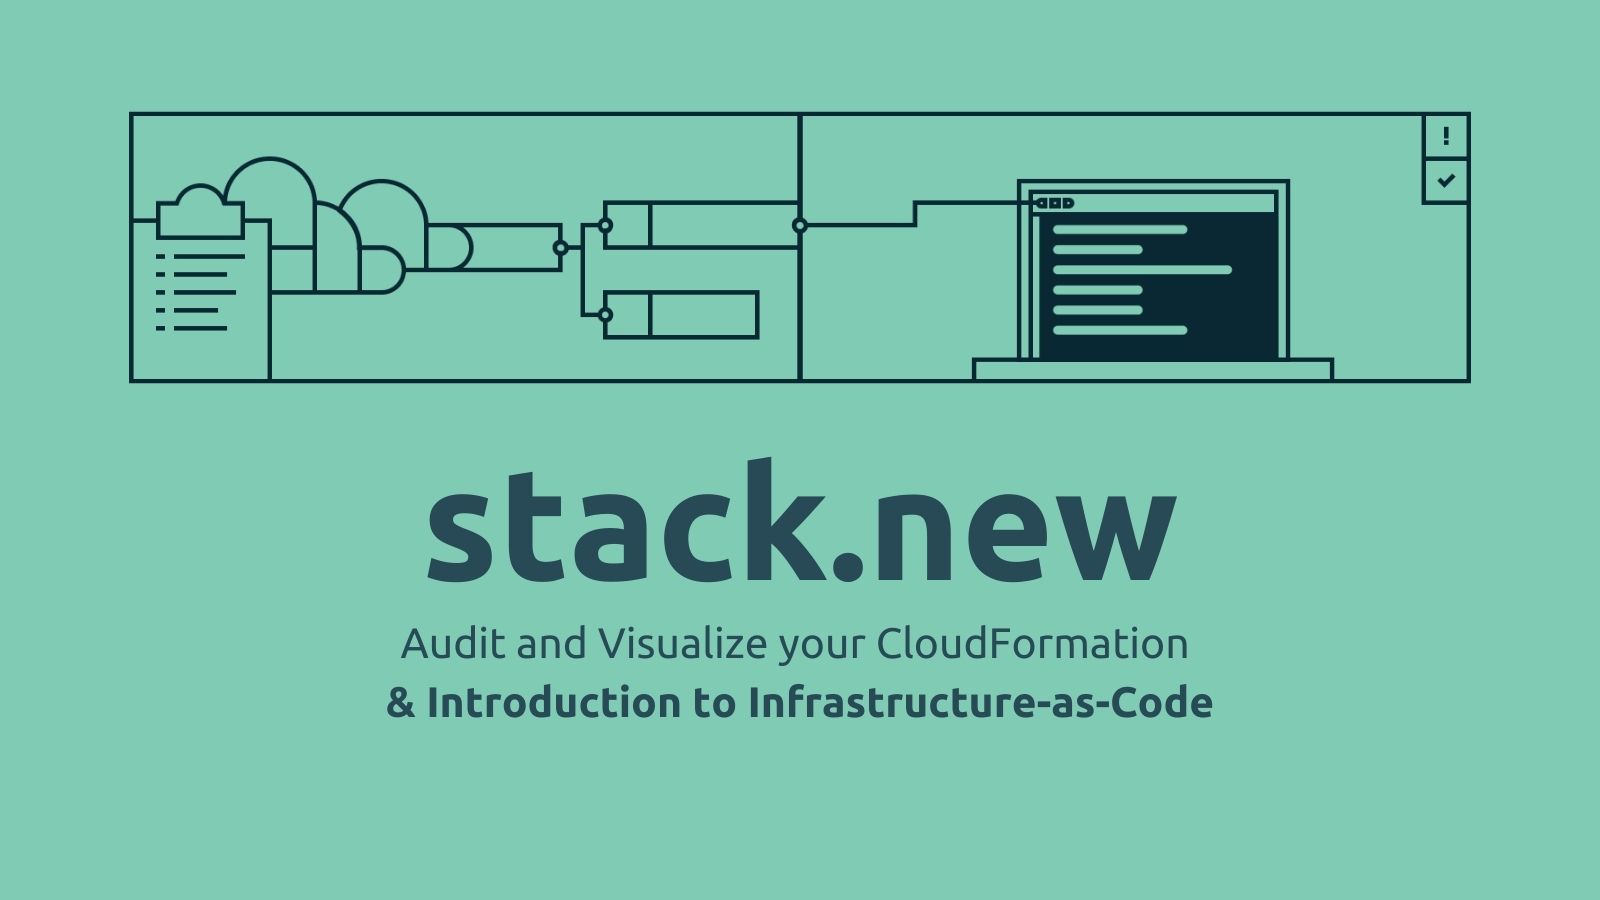  Analyze and audit your infrastructure as code with stack.new